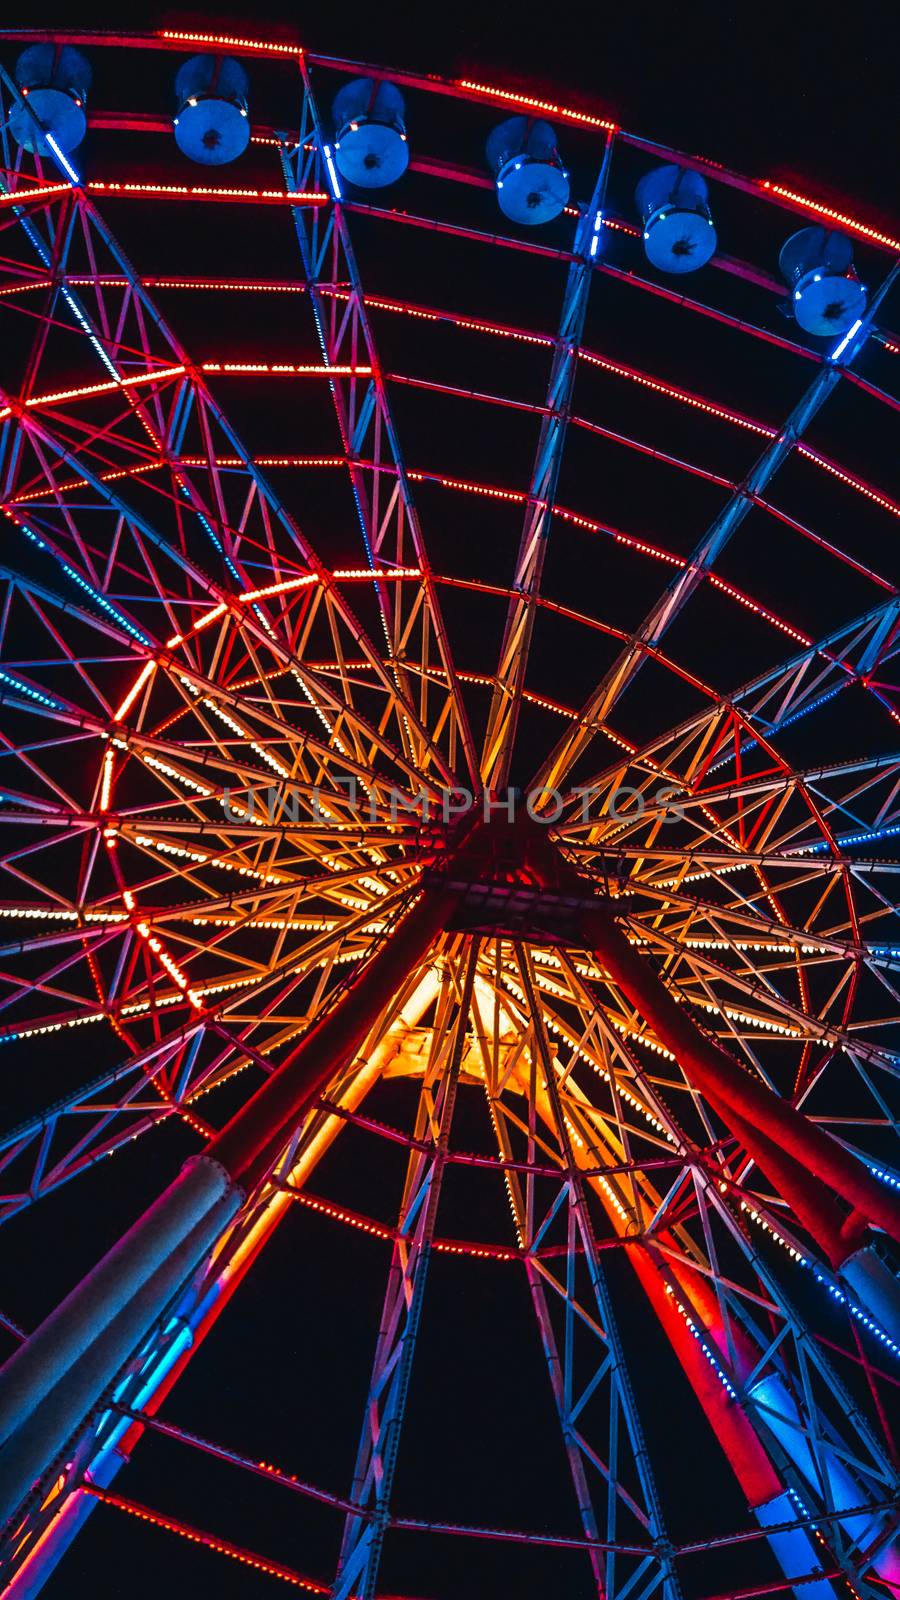 Modern ferris wheel in the night. Free time activities.